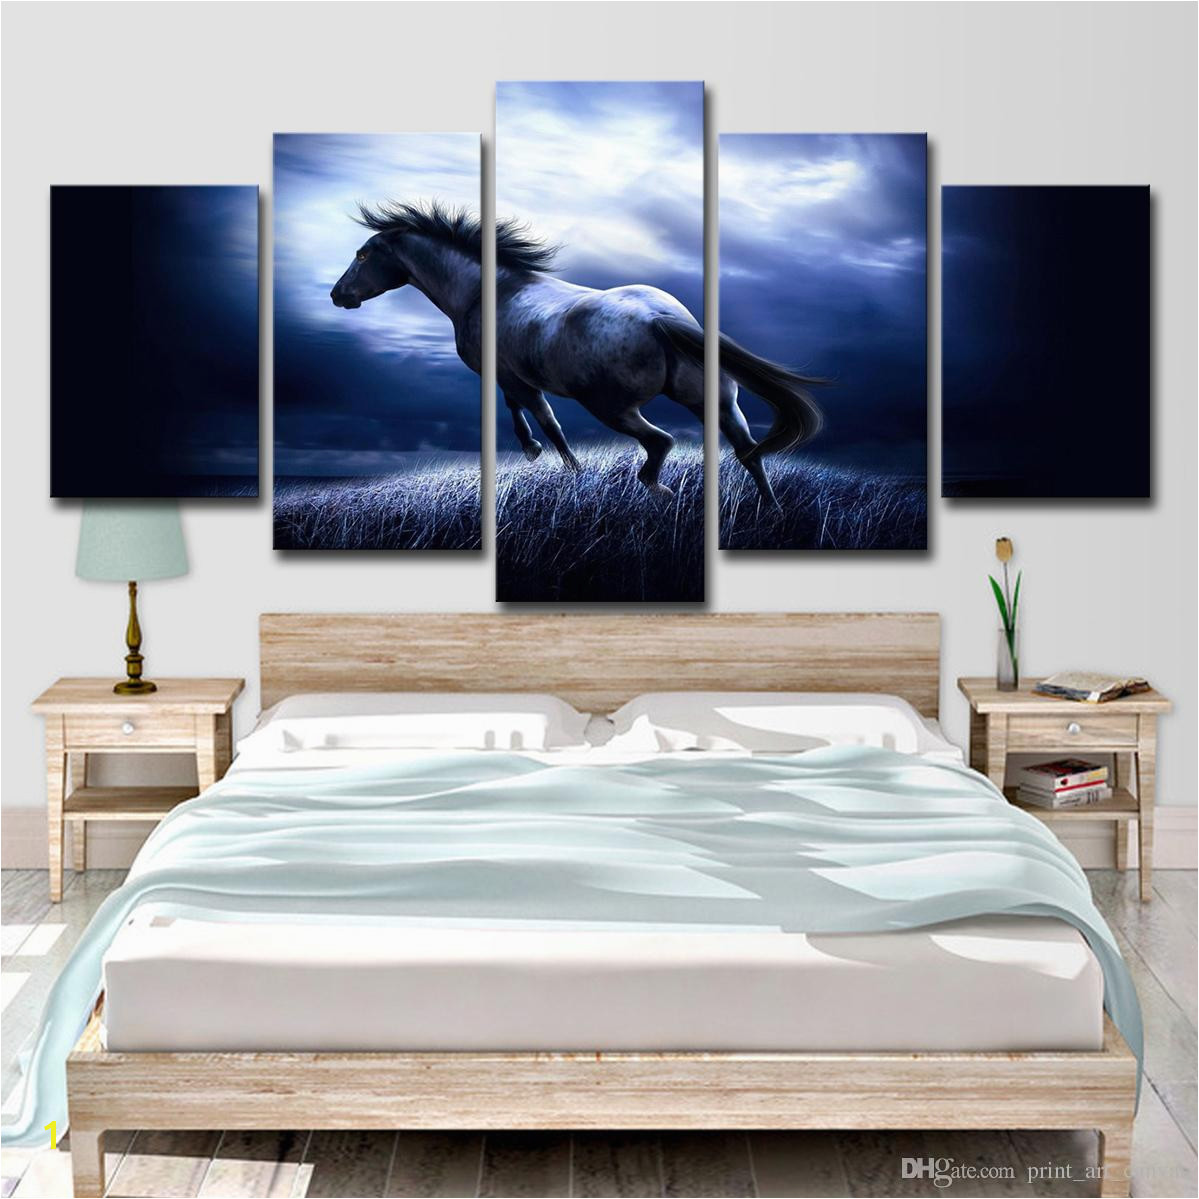 2019 Canvas Wall Art HD Prints Living Room Running Steed In The Night Paintings Animal Horse Poster Decor From Print art canvas $16 41